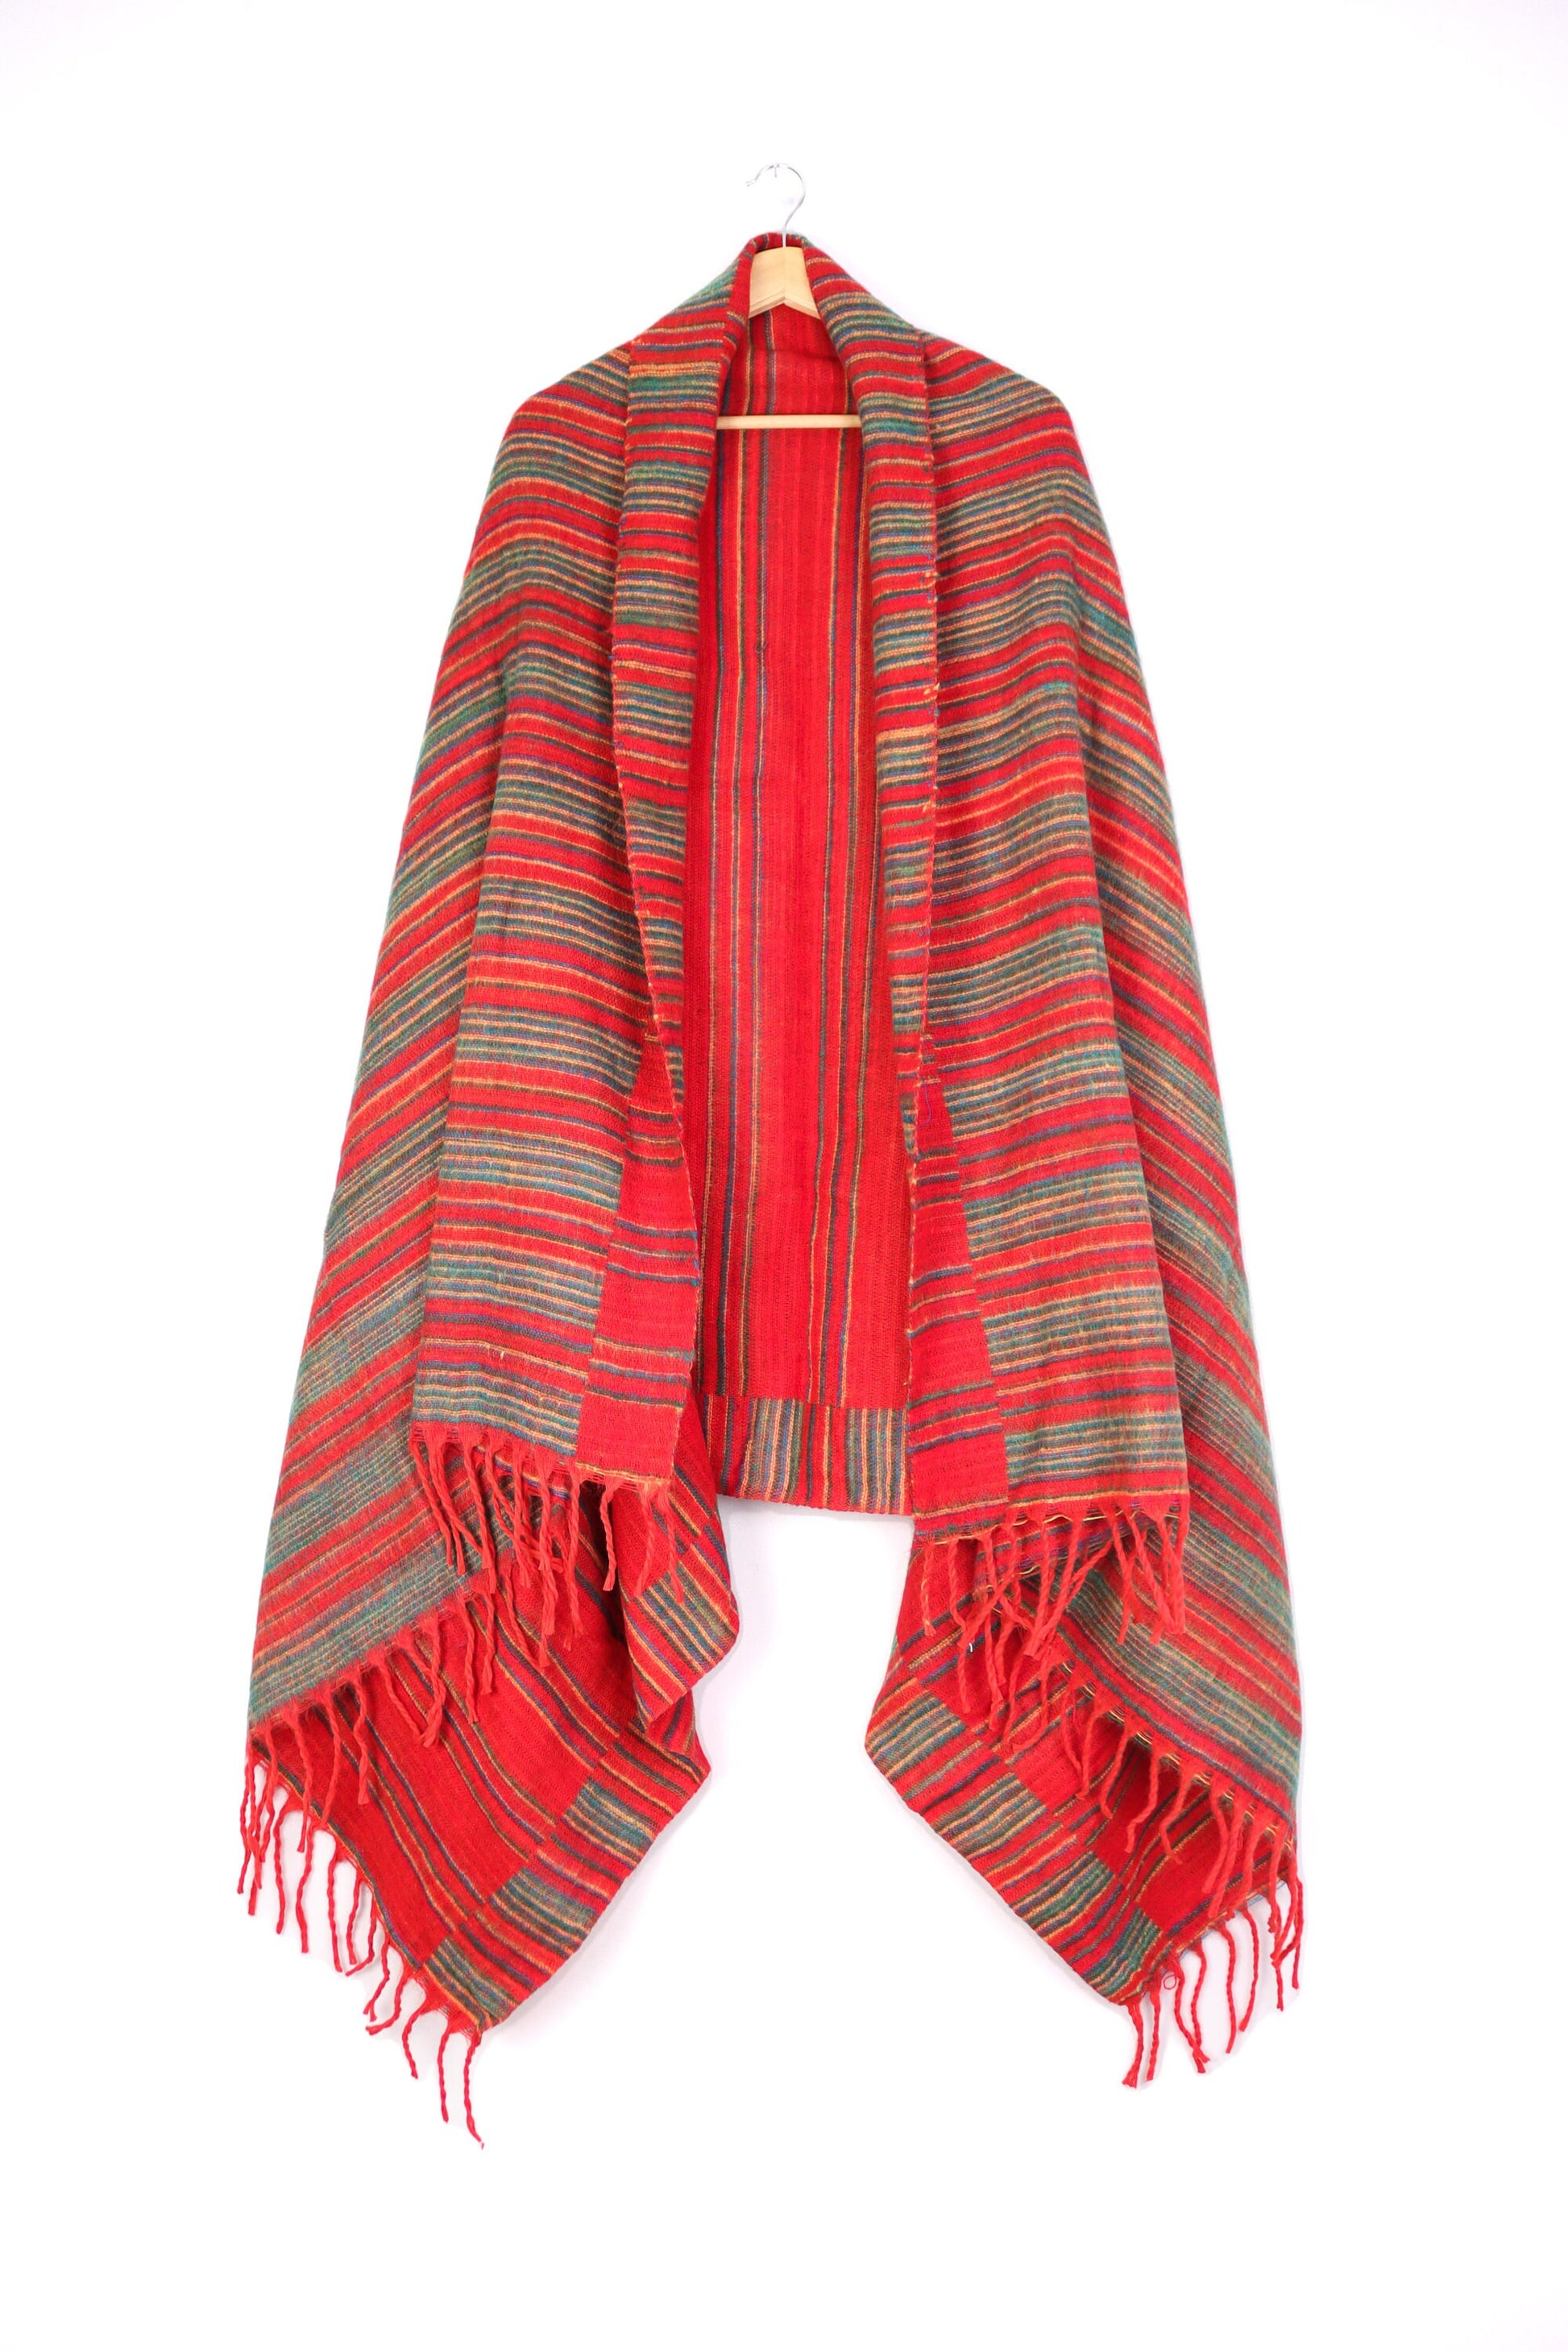 Blanket Scarf / Shawl / Throw - Red Striped - Bare Canvas